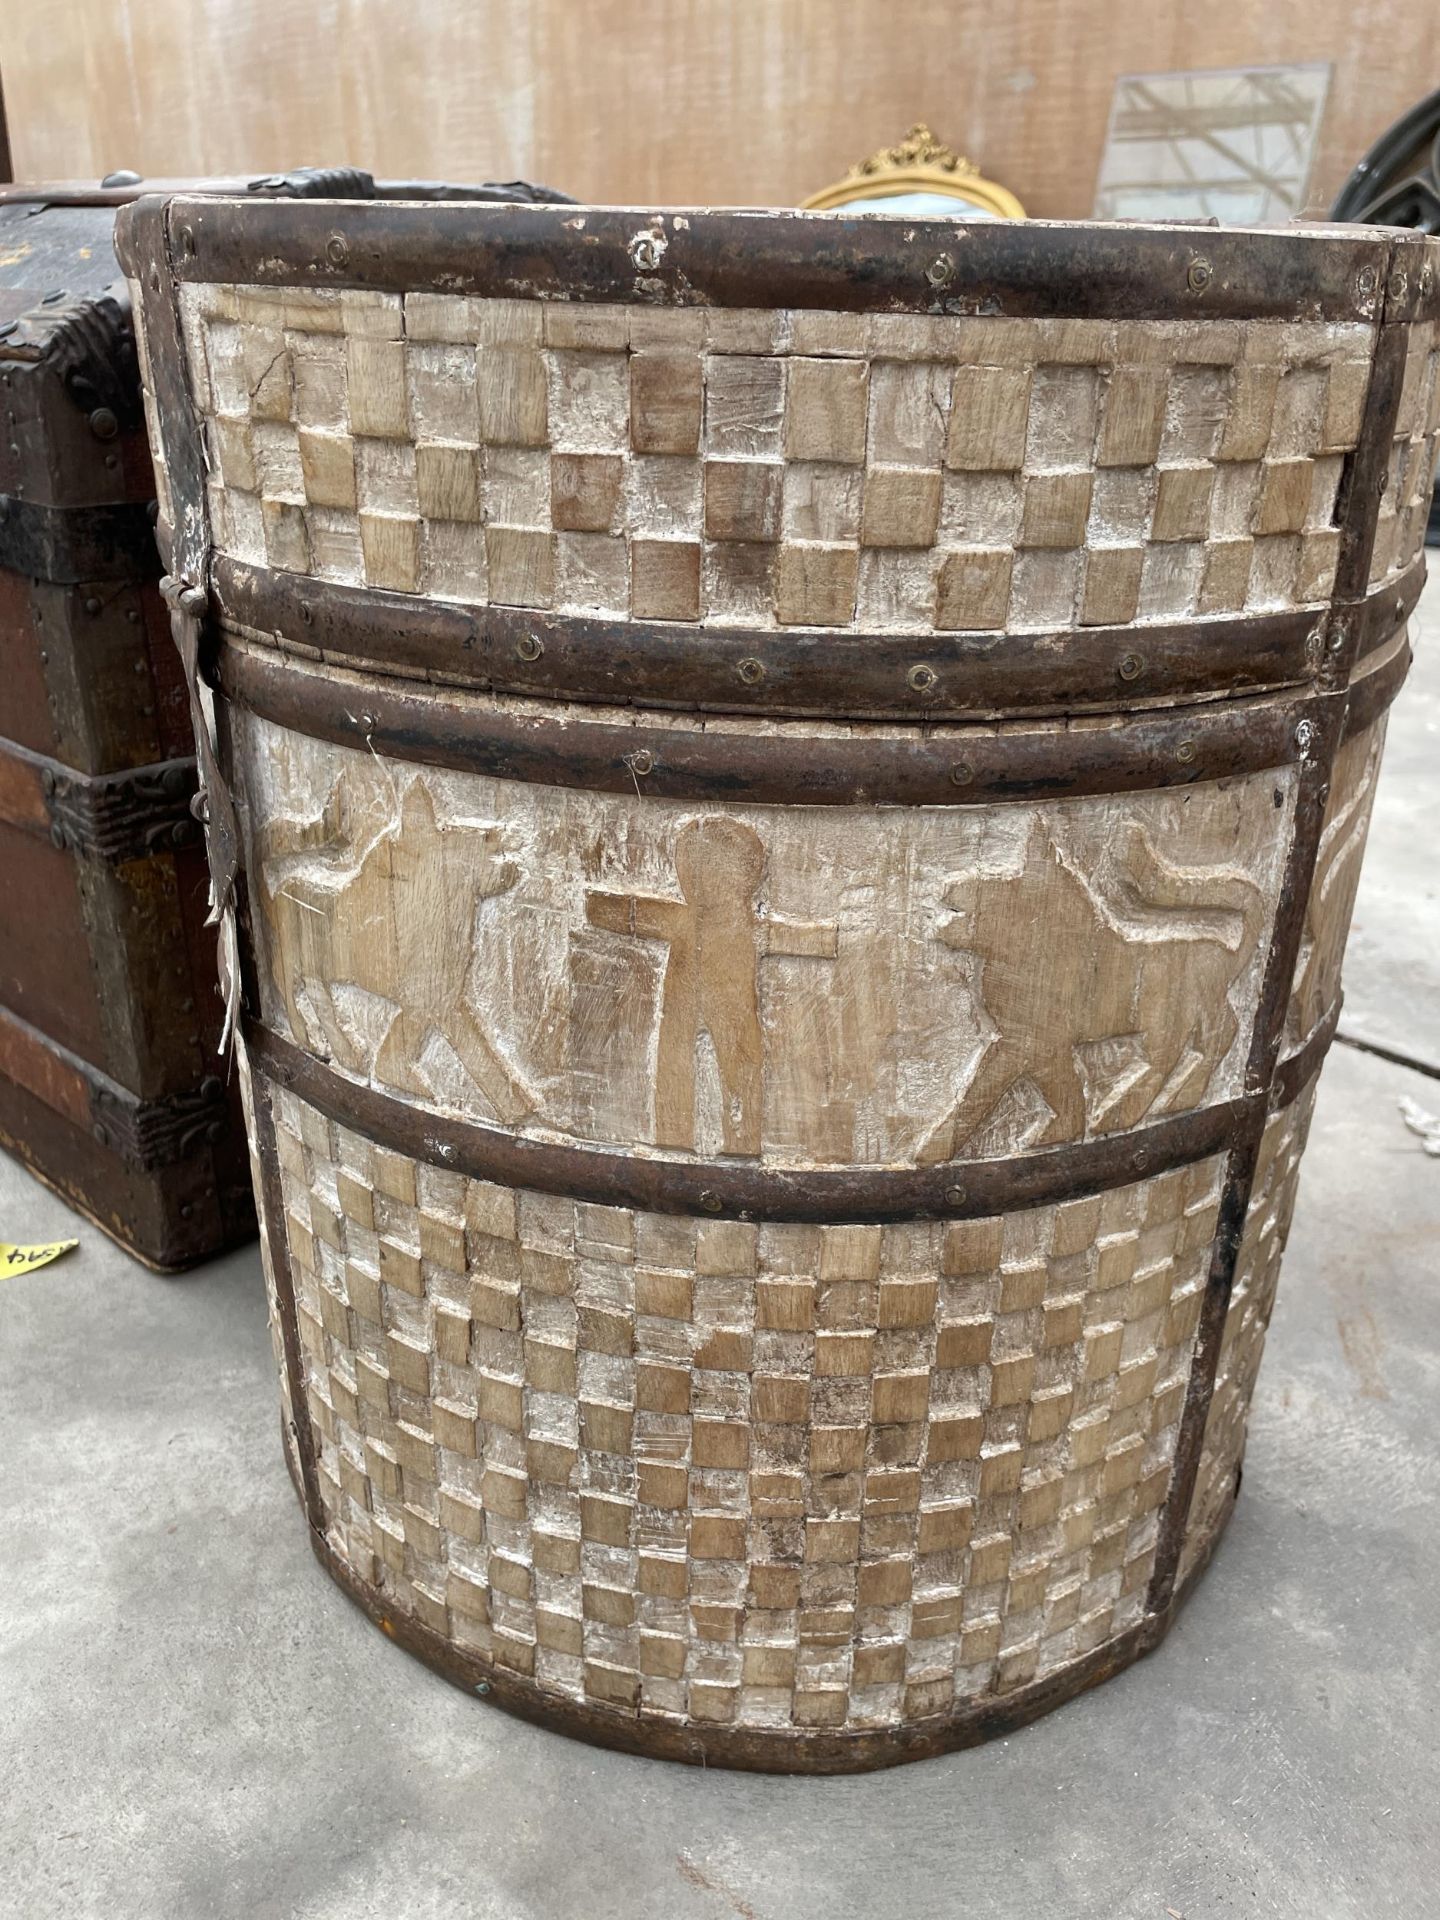 AN INDIAN HARDWOOD GRAIN/RICE DRUM CONTAINER WITH HINGED LID AND METALWARE FITTINGS DIAMETER 18" - Image 4 of 5